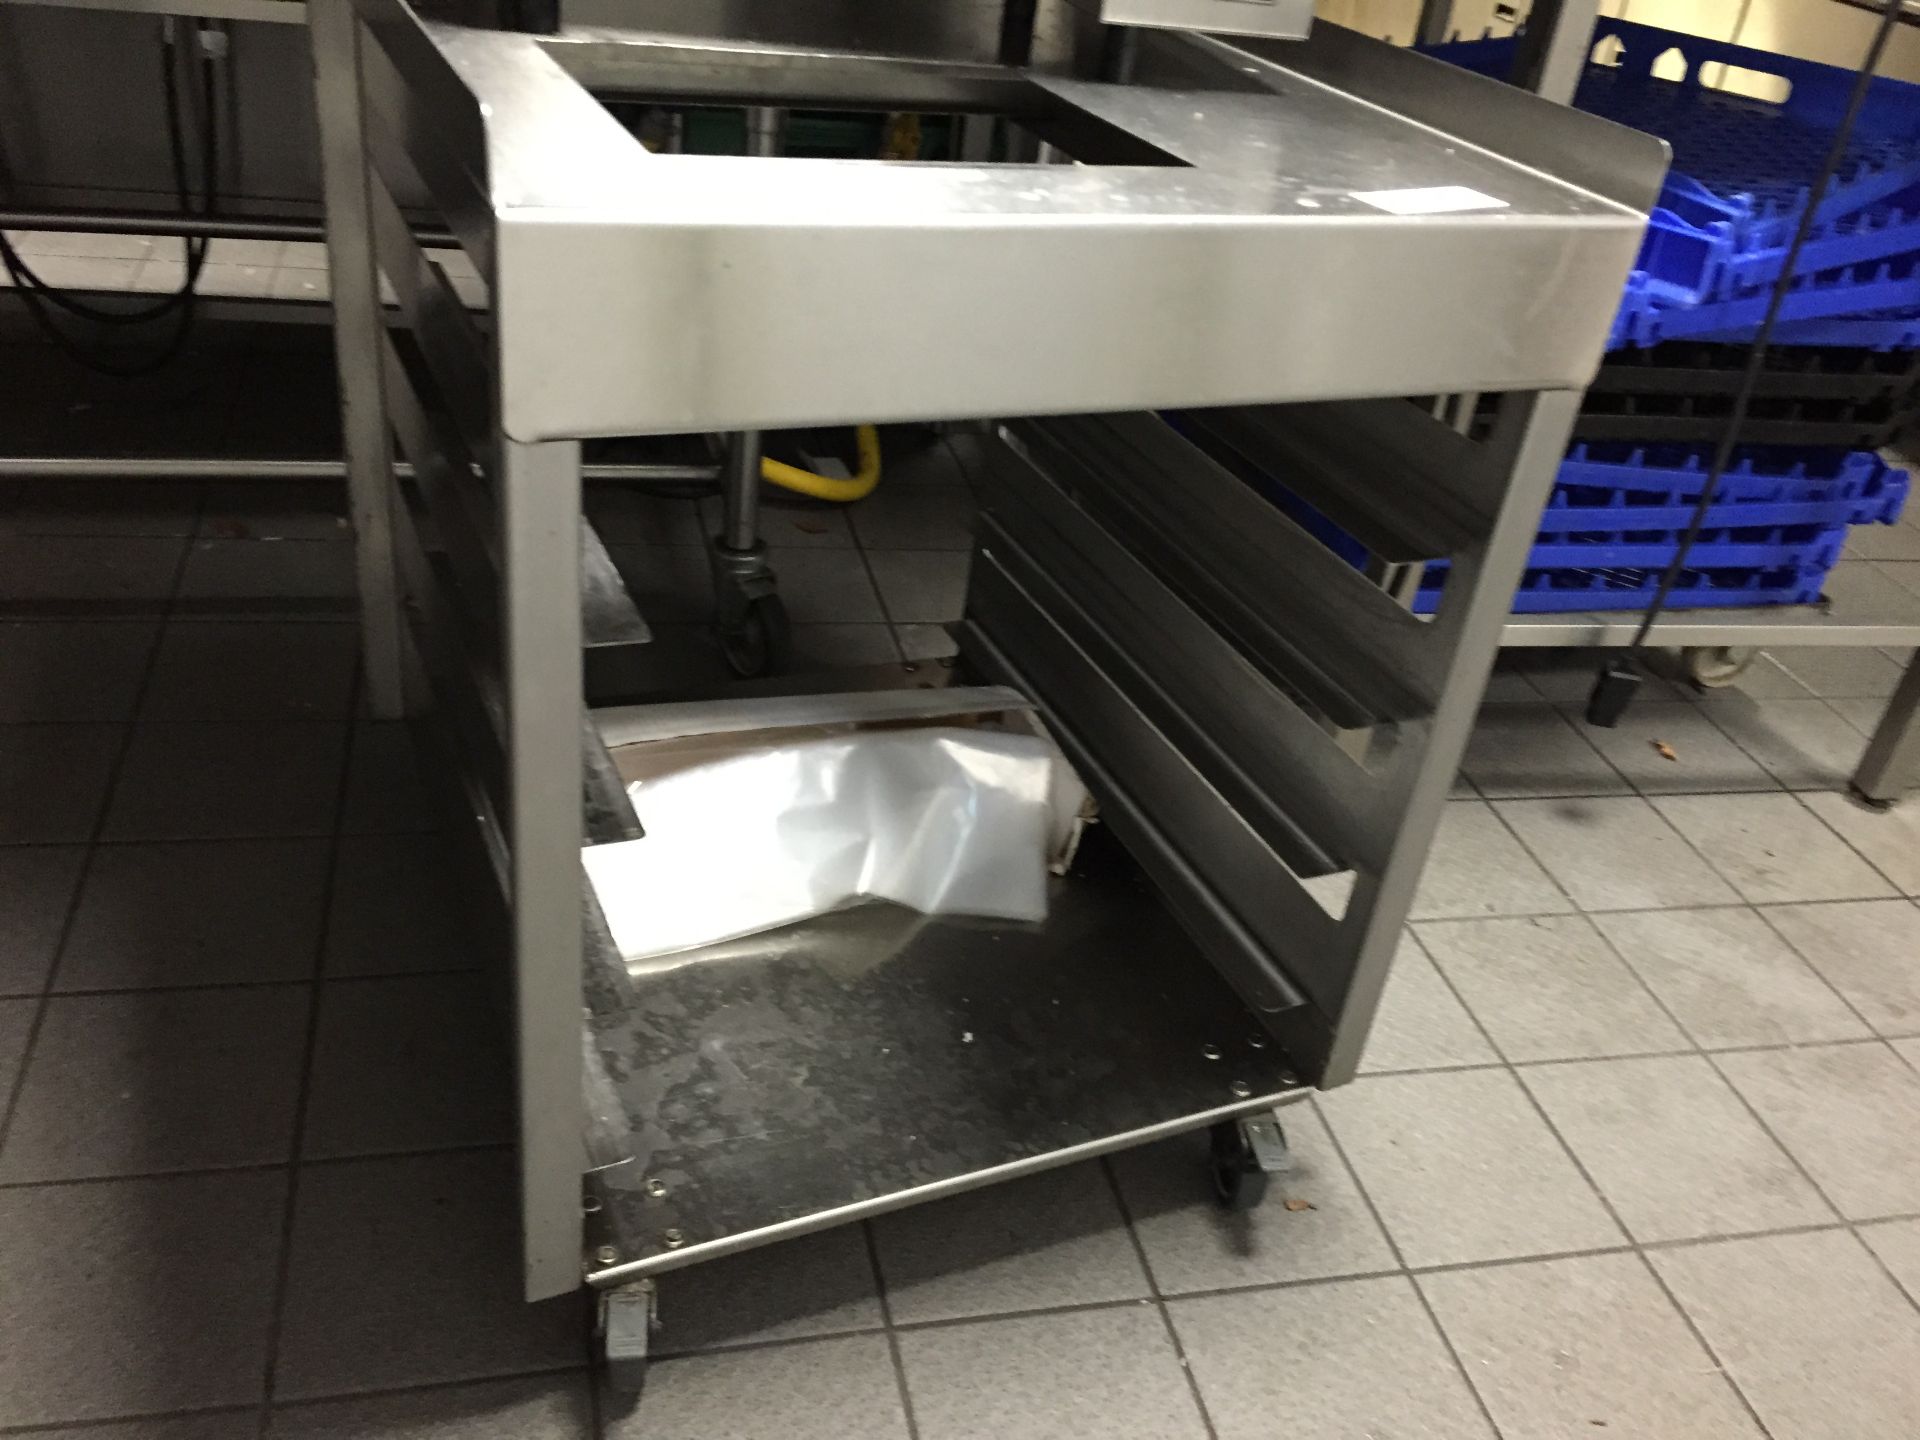 1 x Stainless Steel Tray Storage Trolly - Contents NOT Included - Ref 270 - 63.5cm x 70cm x height - Image 2 of 2